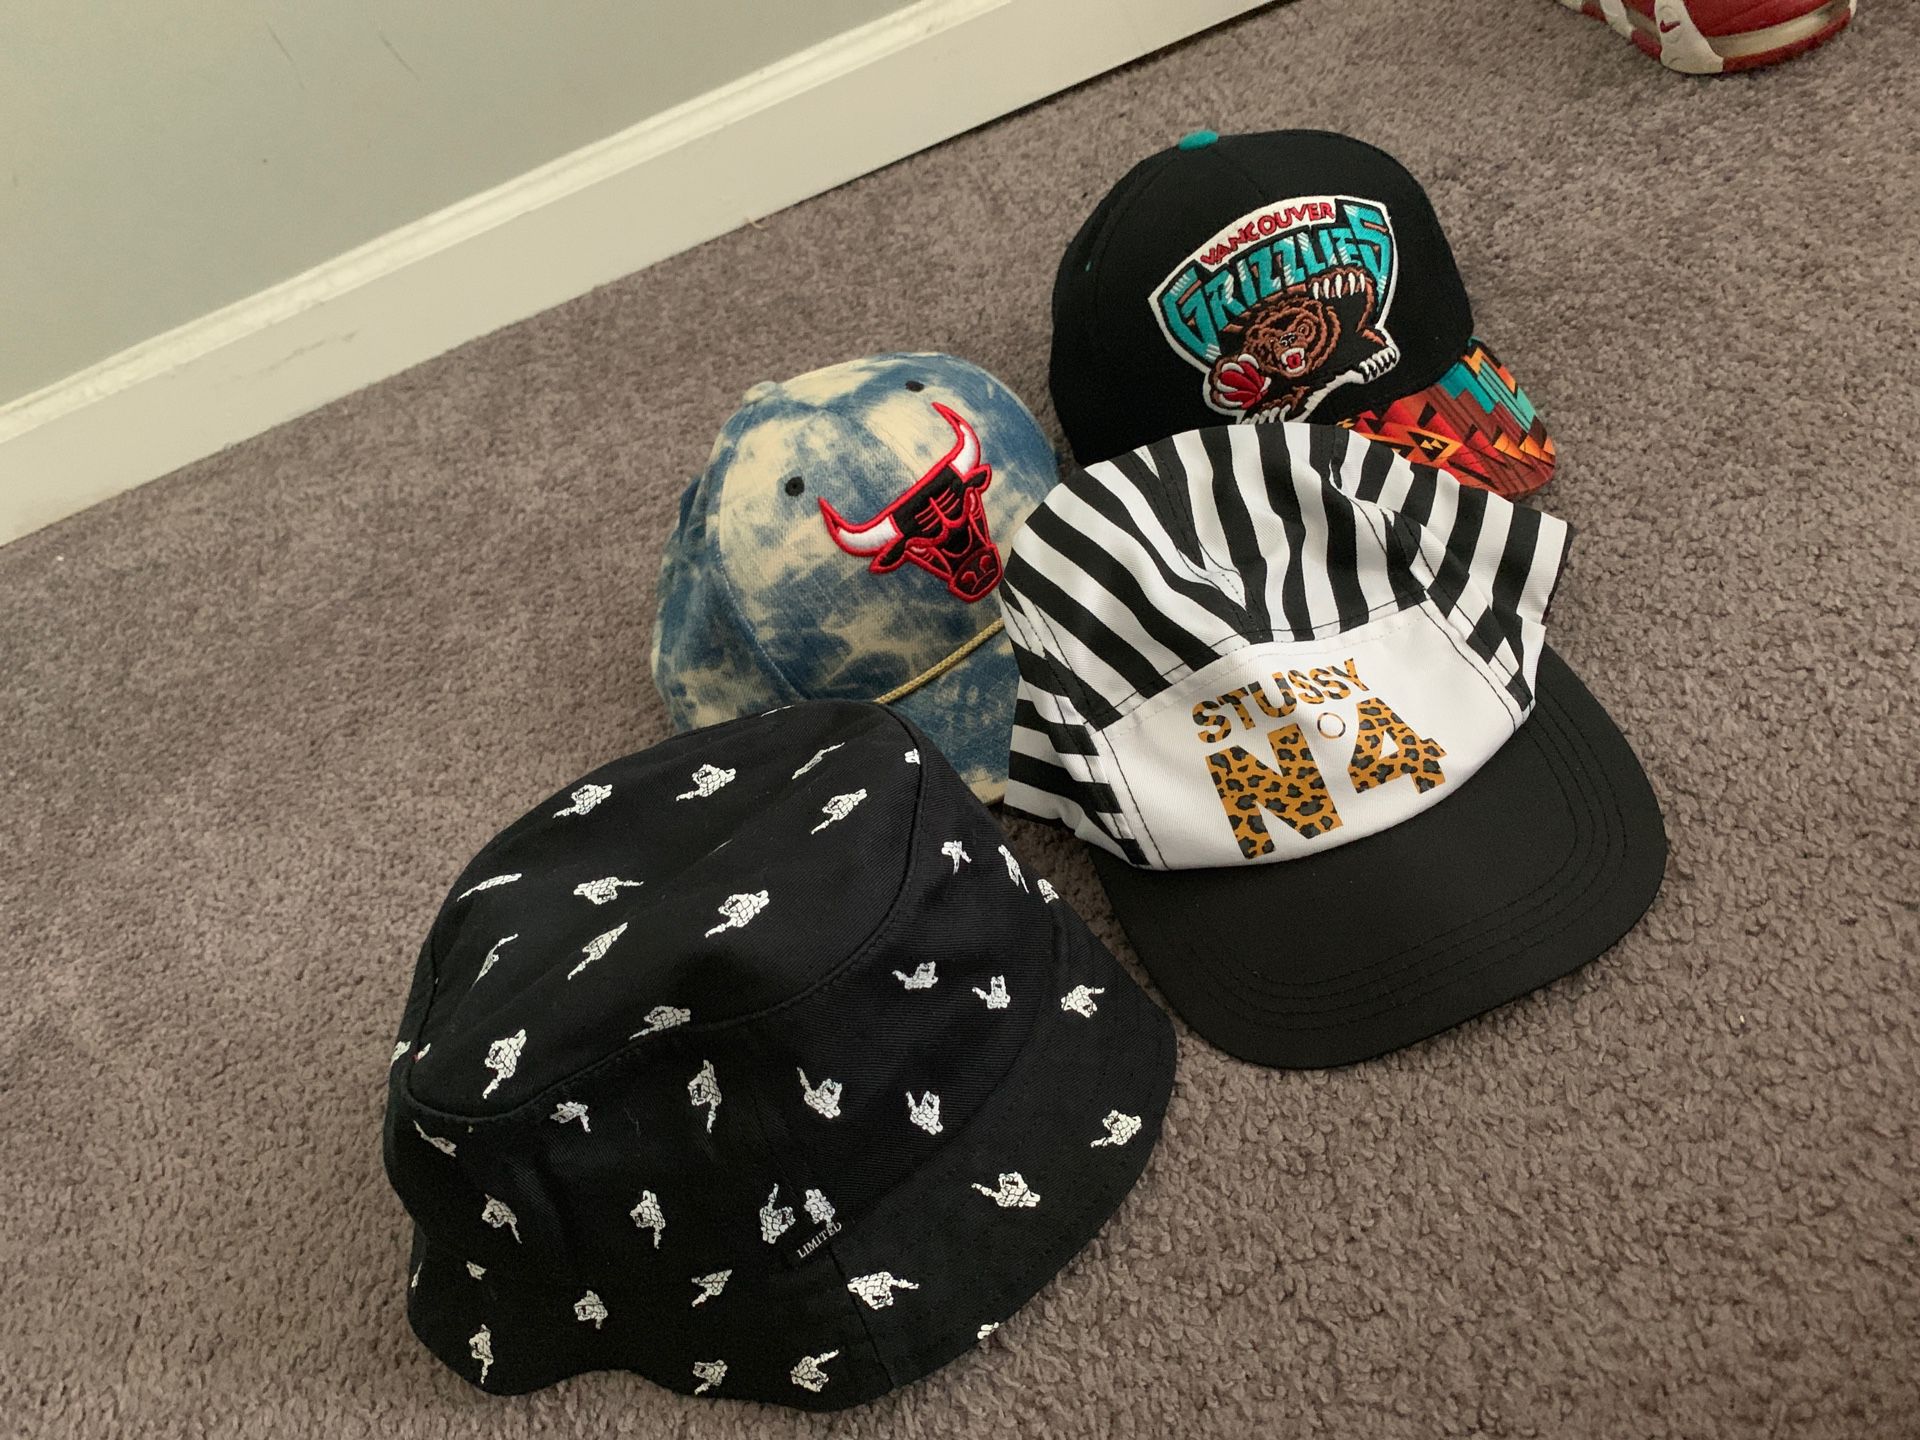 Lot of hats for 50